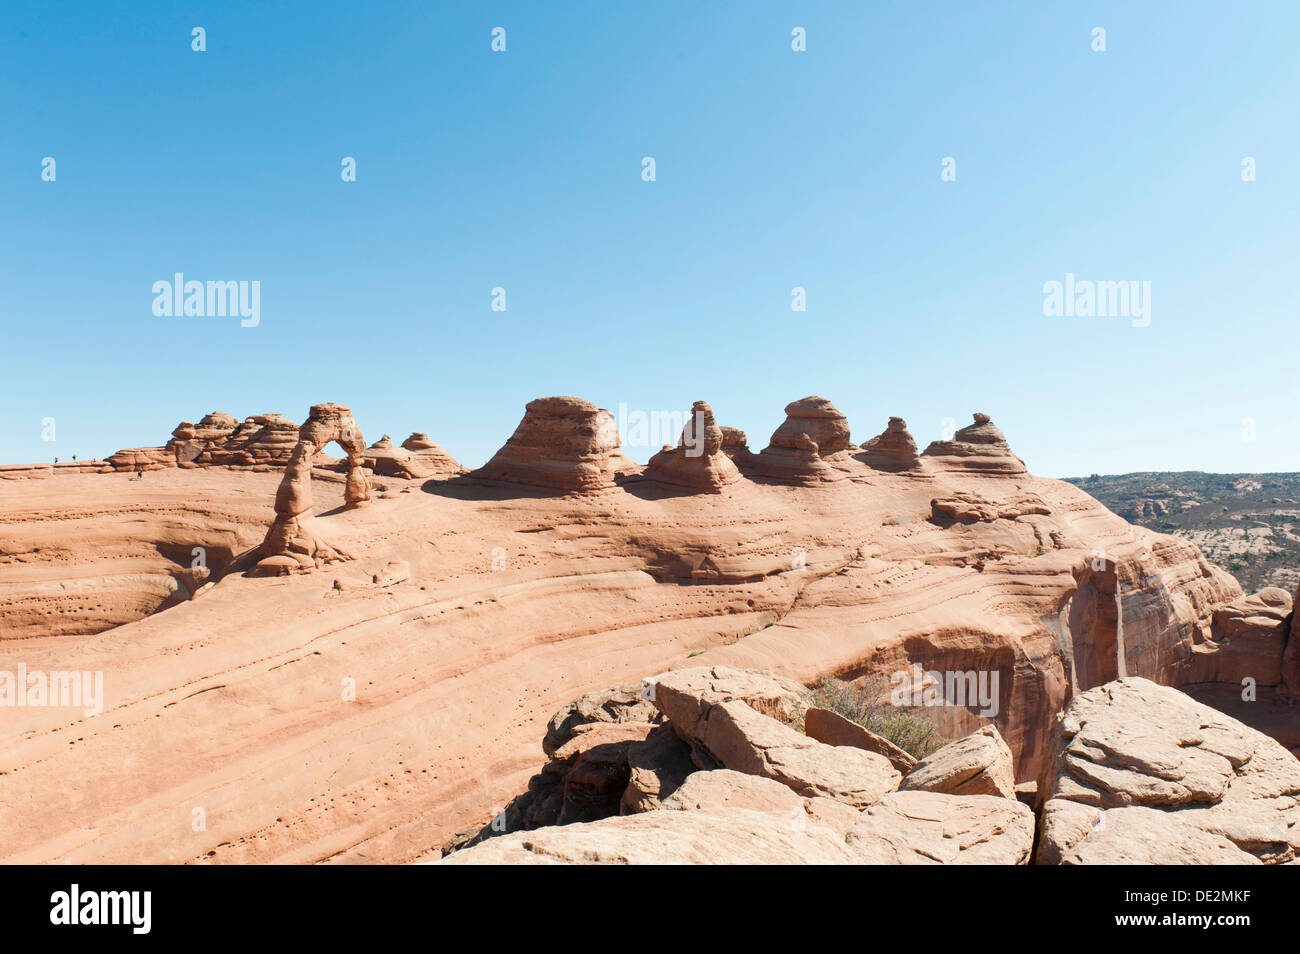 Red sandstone, Delicate Arch, natural stone arches and rock formations, Arches National Park, Utah, Western United States Stock Photo